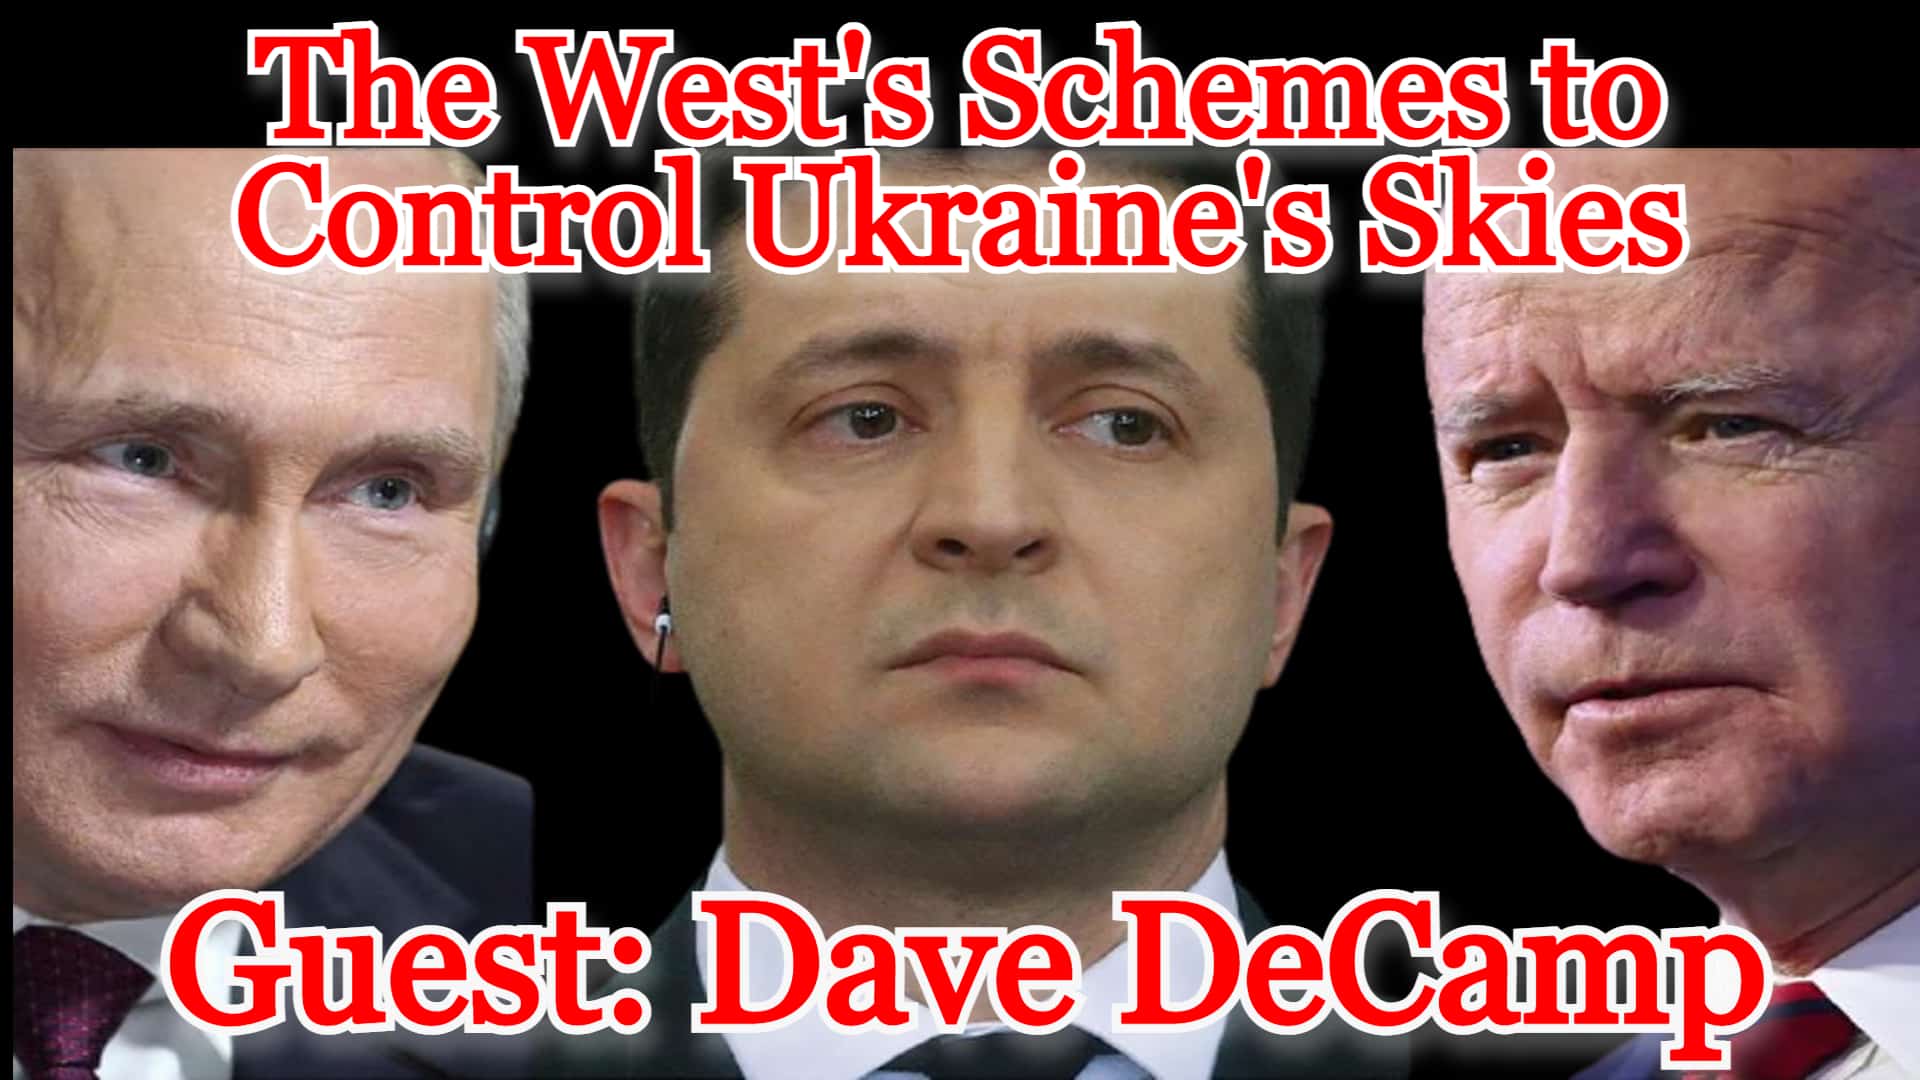 COI #249: Dave DeCamp on the West’s Schemes to Control Ukraine’s Skies